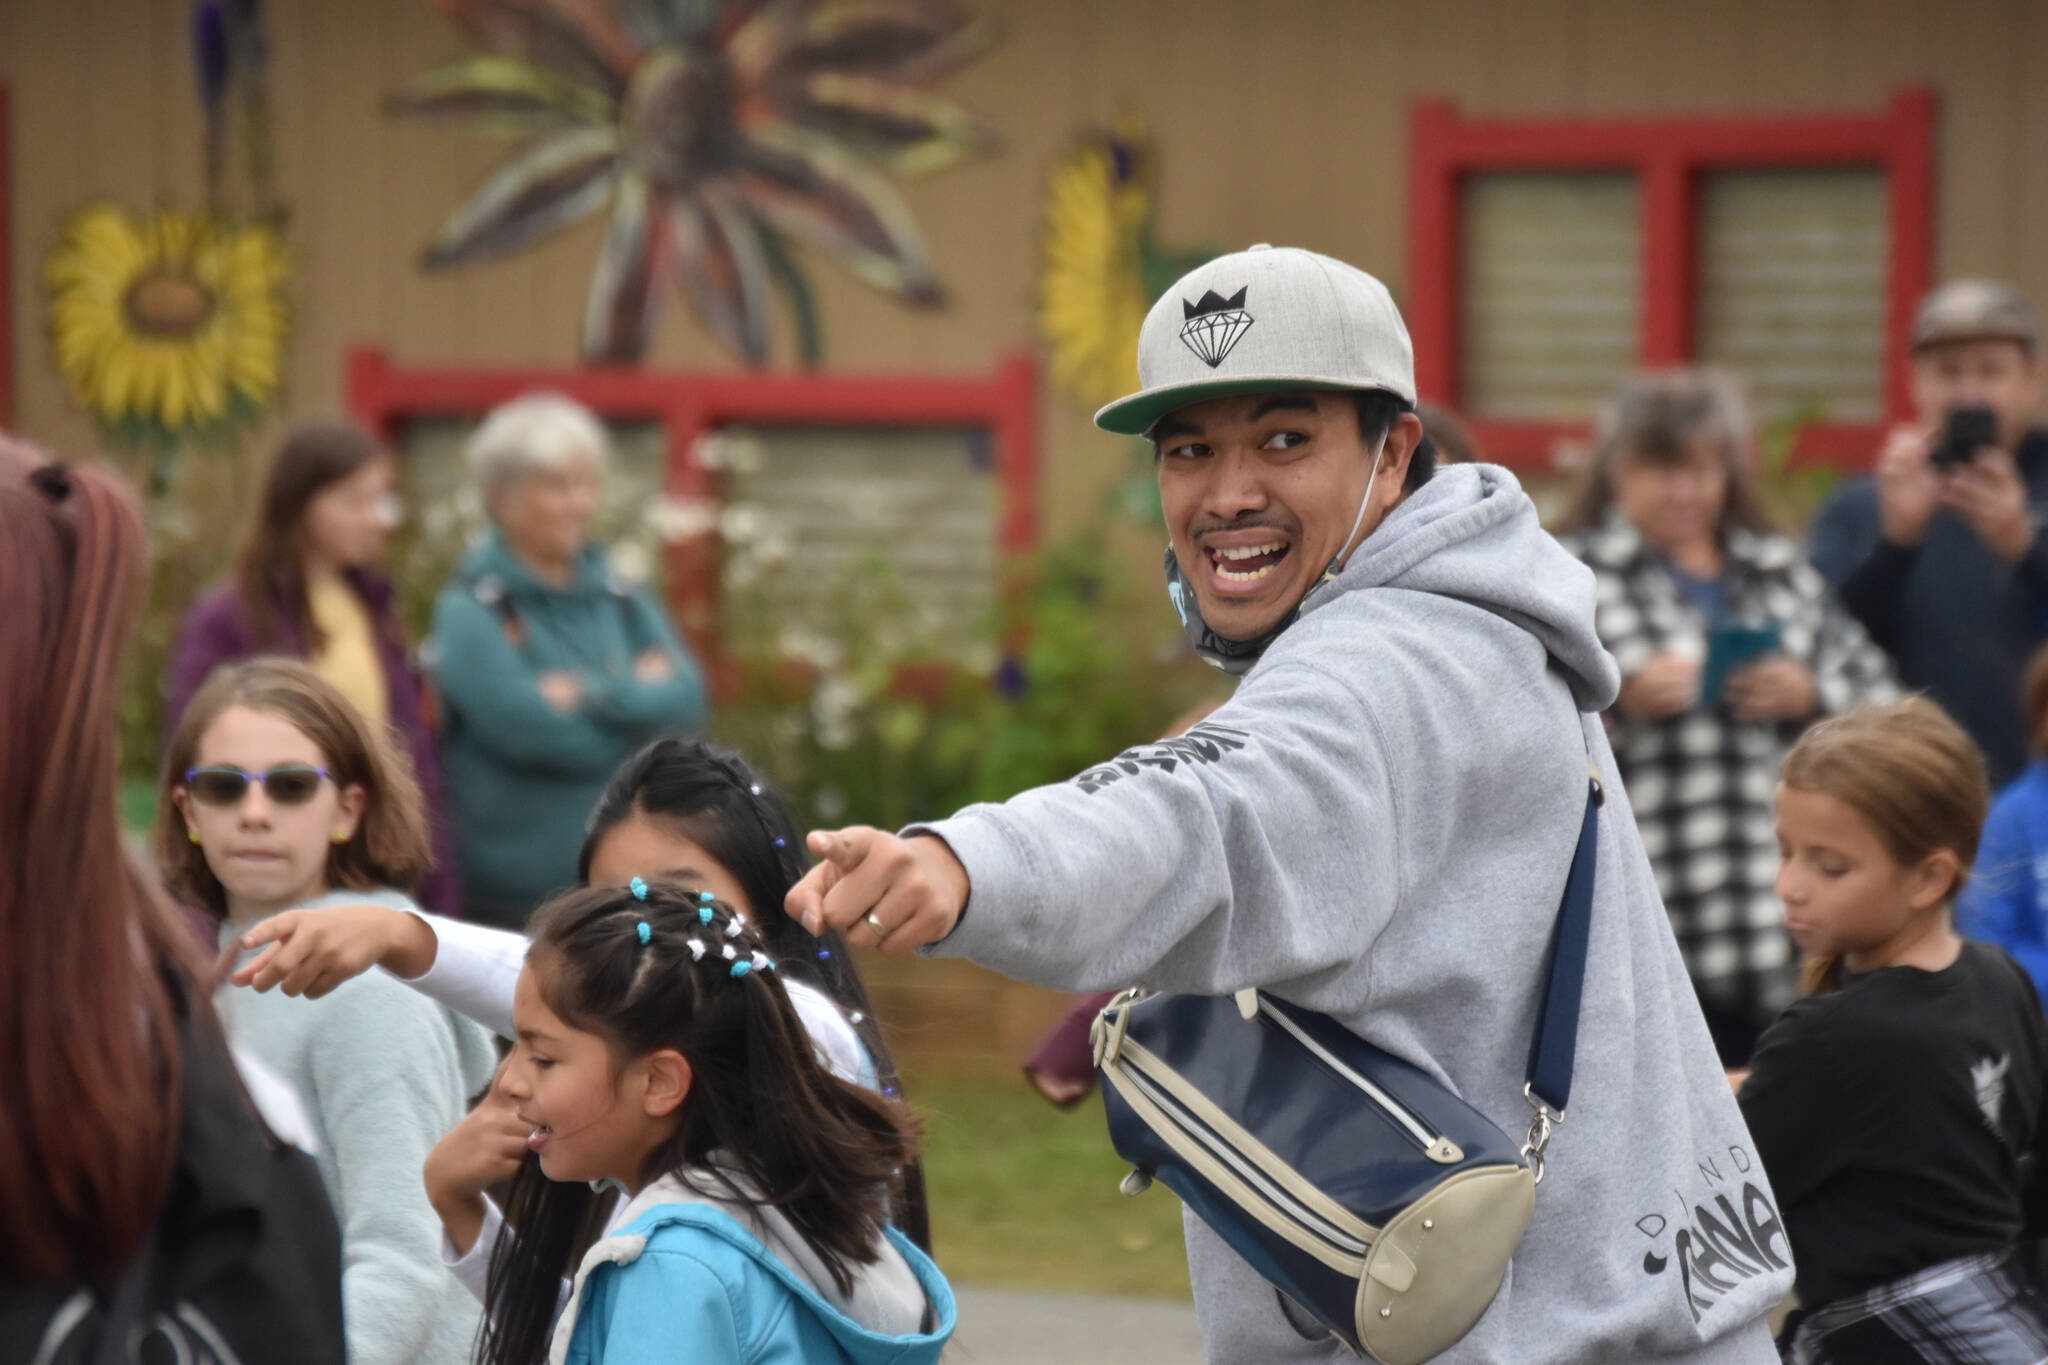 The head of a dance troupe leads both dancers and passerby in a flash mob style performance at the Kenai Peninsula Fair on Aug. 12, 2022, in Ninilchik, Alaska. (Jake Dye/Peninsula Clarion)